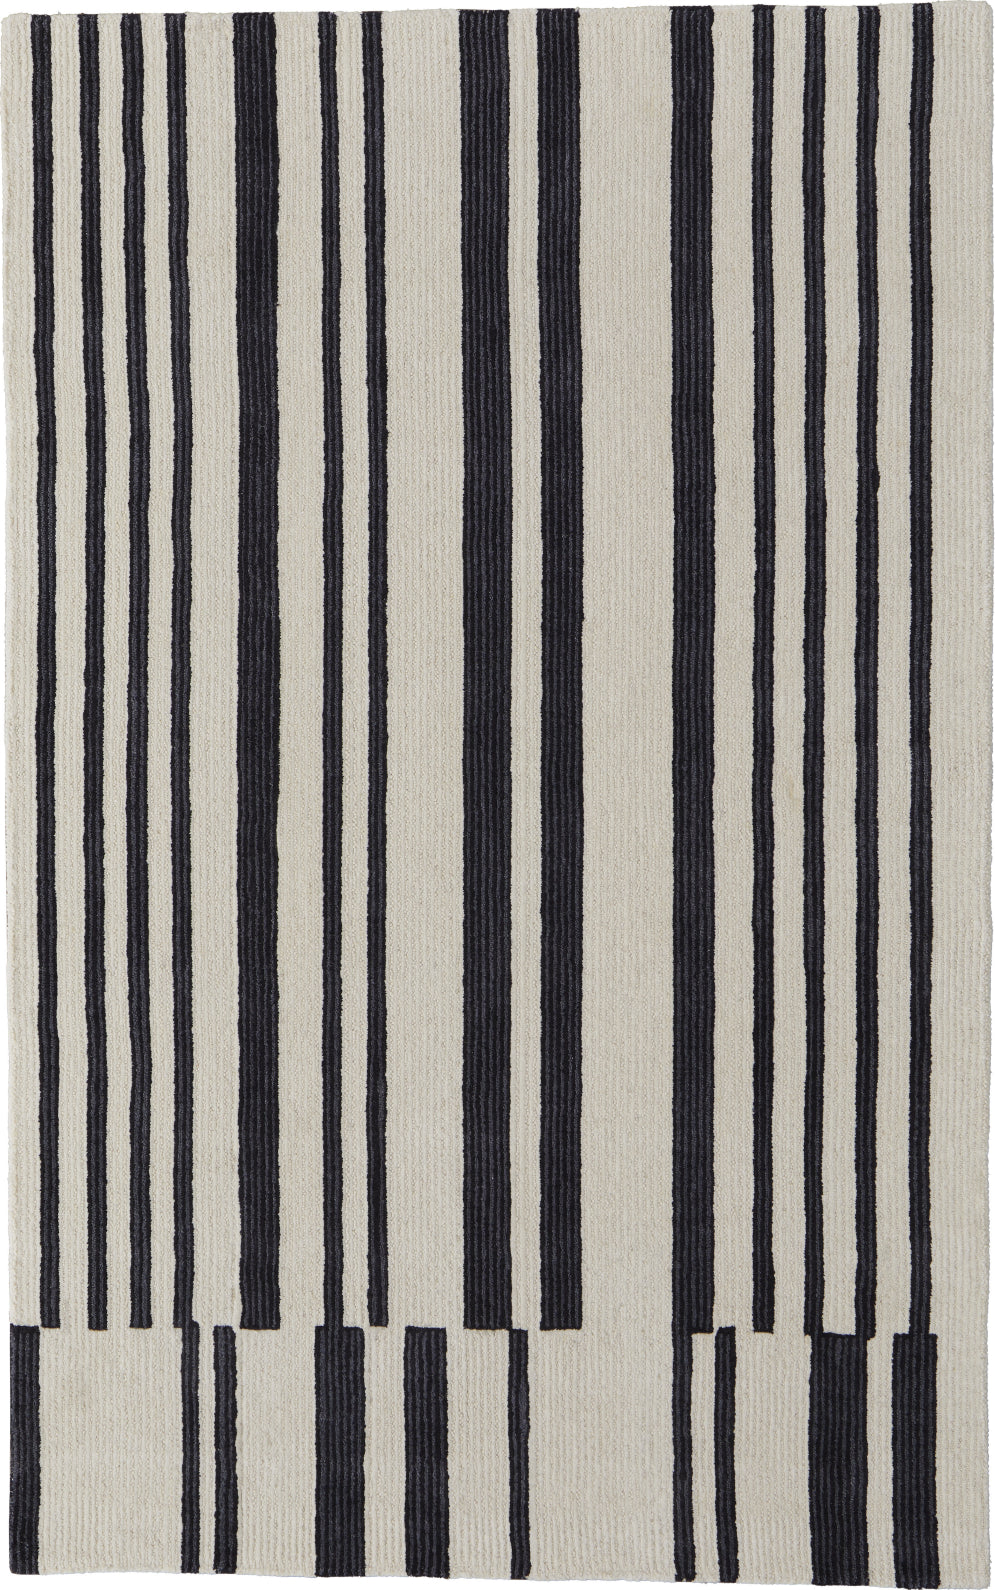 Feizy Maguire 8901F Ivory/Black Area Rug main image